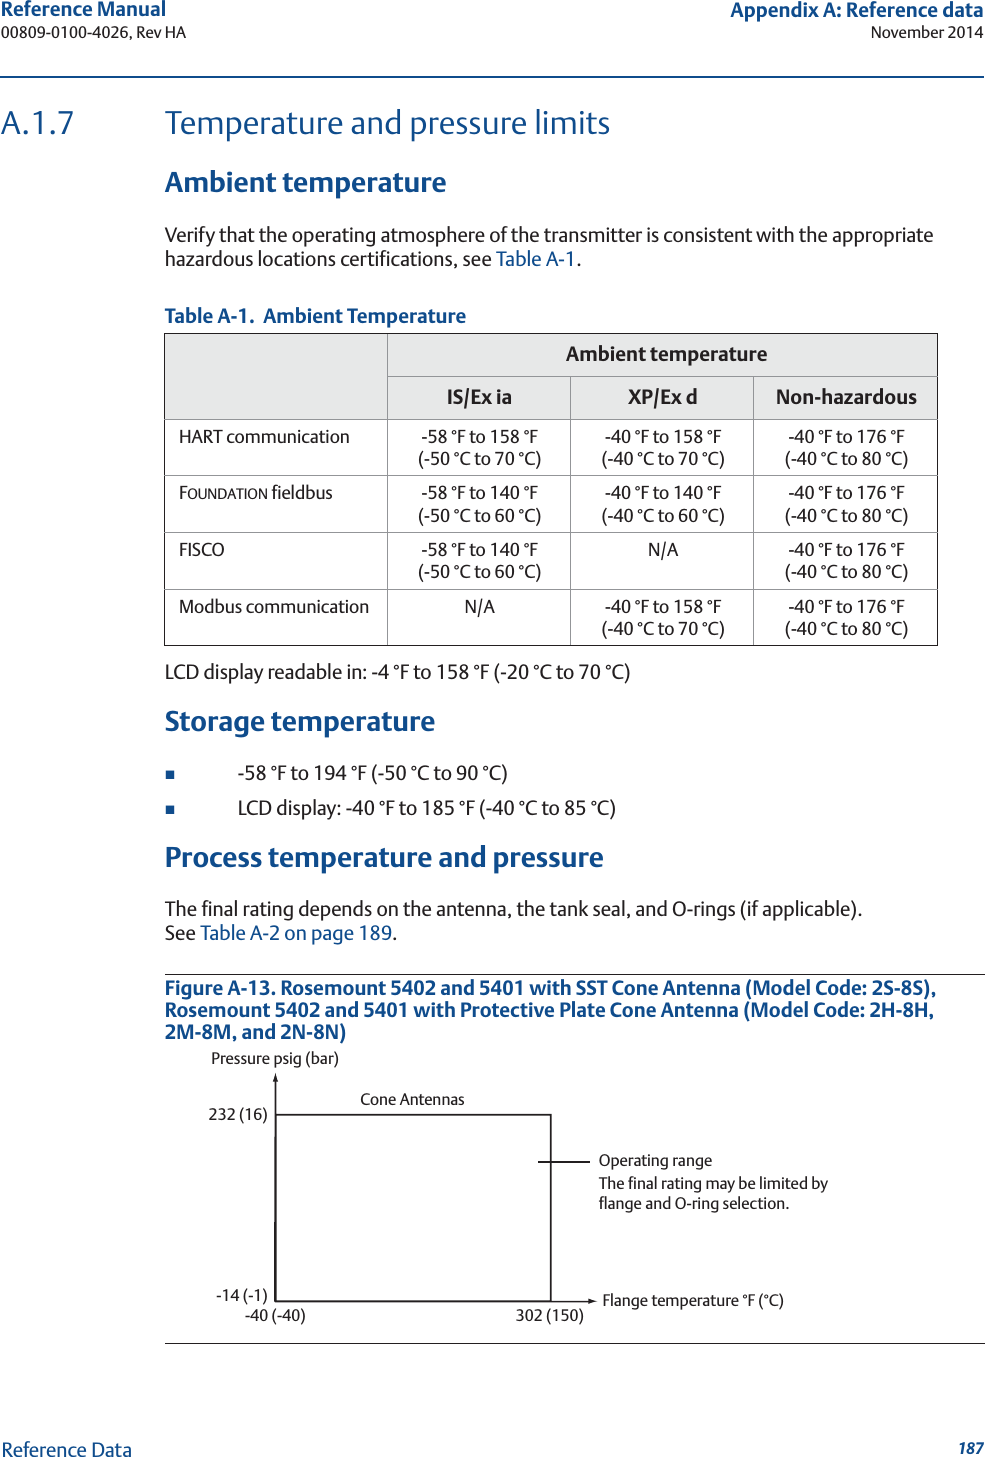 187Reference Manual 00809-0100-4026, Rev HAAppendix A: Reference dataNovember 2014Reference DataA.1.7 Temperature and pressure limitsAmbient temperatureVerify that the operating atmosphere of the transmitter is consistent with the appropriate hazardous locations certifications, see Table A-1.LCD display readable in: -4 °F to 158 °F (-20 °C to 70 °C)Storage temperature-58 °F to 194 °F (-50 °C to 90 °C)LCD display: -40 °F to 185 °F (-40 °C to 85 °C)Process temperature and pressureThe final rating depends on the antenna, the tank seal, and O-rings (if applicable). See Table A-2 on page 189.Figure A-13. Rosemount 5402 and 5401 with SST Cone Antenna (Model Code: 2S-8S), Rosemount 5402 and 5401 with Protective Plate Cone Antenna (Model Code: 2H-8H, 2M-8M, and 2N-8N)Table A-1.  Ambient TemperatureAmbient temperatureIS/Ex ia XP/Ex d Non-hazardousHART communication -58 °F to 158 °F(-50 °C to 70 °C)-40 °F to 158 °F(-40 °C to 70 °C)-40 °F to 176 °F(-40 °C to 80 °C)FOUNDATION fieldbus -58 °F to 140 °F(-50 °C to 60 °C)-40 °F to 140 °F(-40 °C to 60 °C)-40 °F to 176 °F(-40 °C to 80 °C)FISCO -58 °F to 140 °F(-50 °C to 60 °C)N/A -40 °F to 176 °F(-40 °C to 80 °C)Modbus communication N/A -40 °F to 158 °F(-40 °C to 70 °C)-40 °F to 176 °F(-40 °C to 80 °C)Pressure psig (bar)Flange temperature °F (°C)-40 (-40) 302 (150)Cone Antennas-14 (-1)232 (16)Operating rangeThe final rating may be limited by flange and O-ring selection.